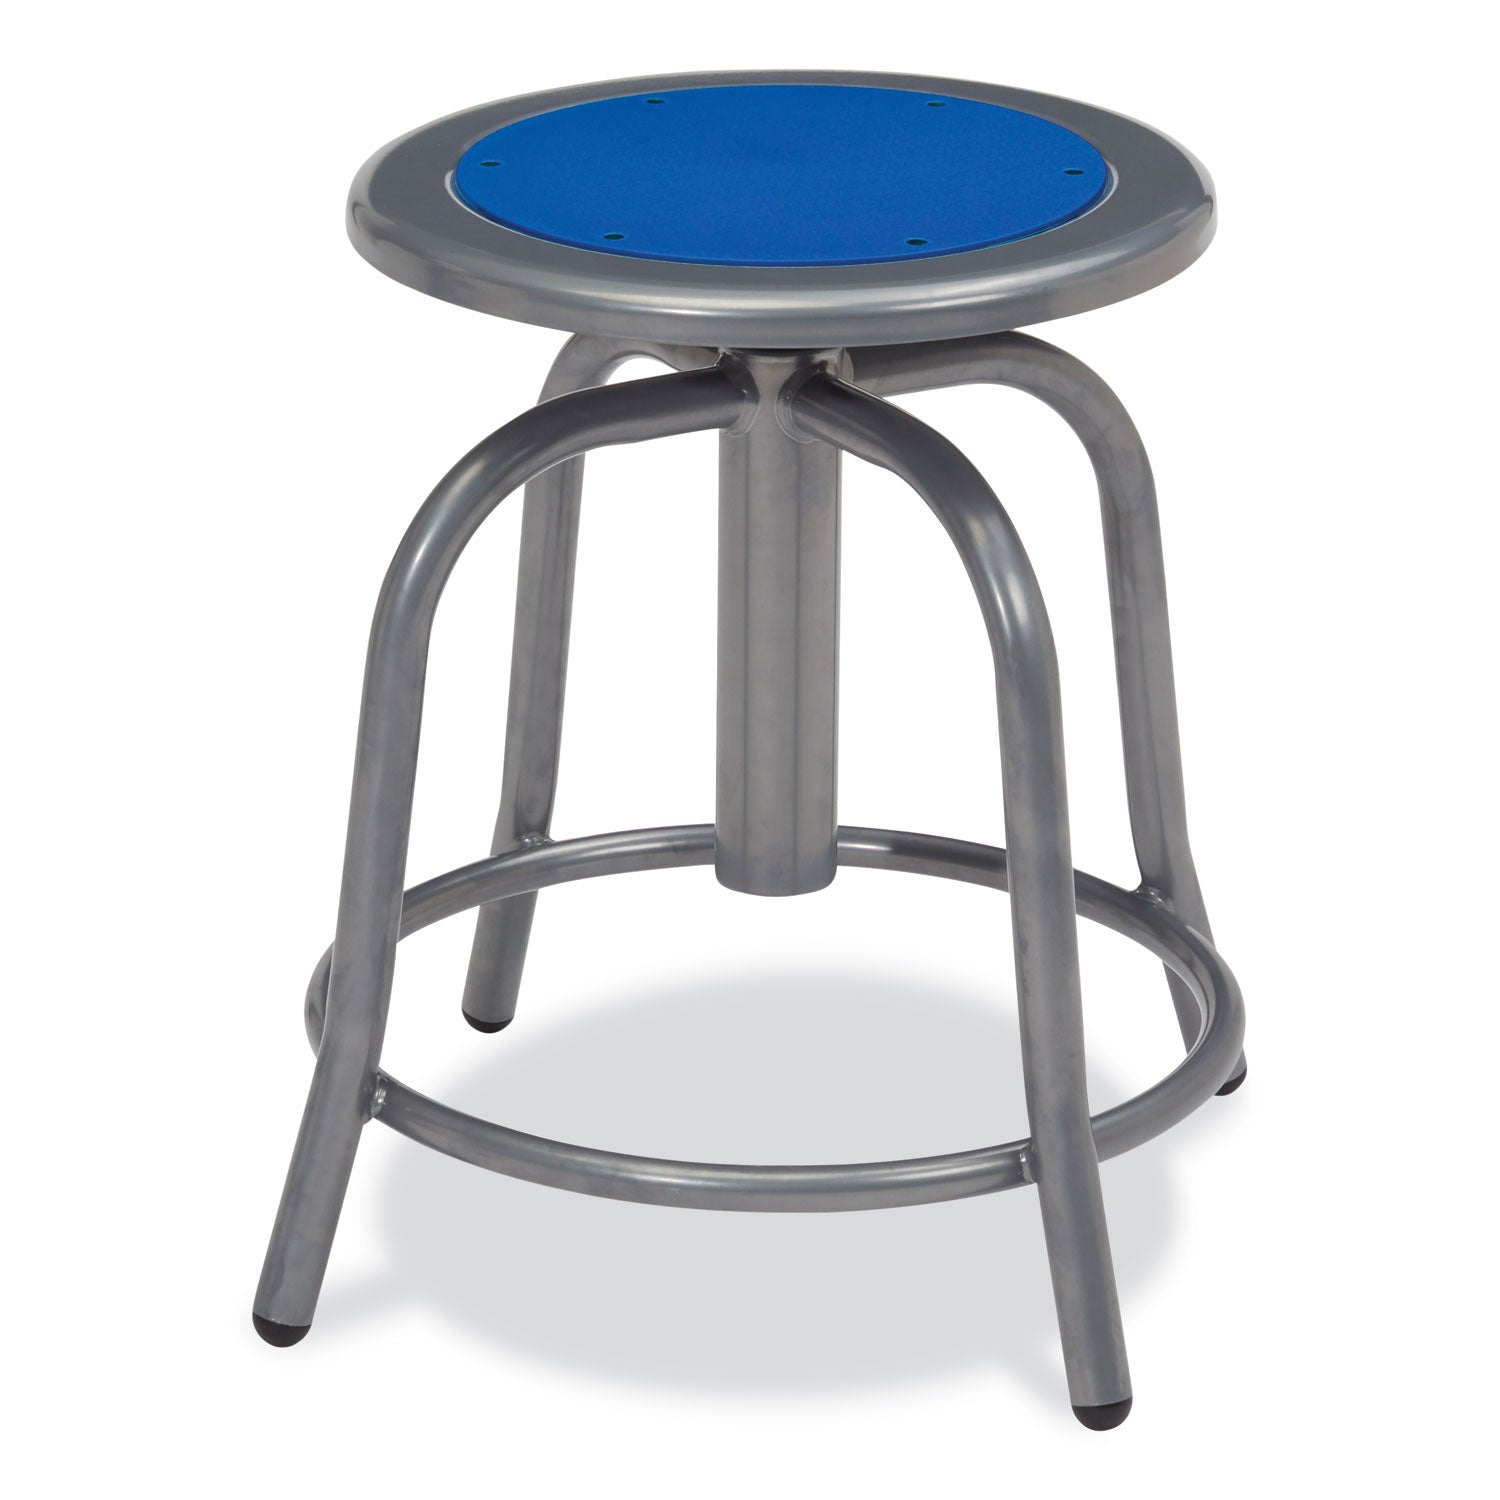 6800-series-height-adj-metal-seat-stool-supports-300-lb-18-24-seat-ht-persian-blue-seat-gray-base-ships-in-1-3-bus-days_nps682502 - 1